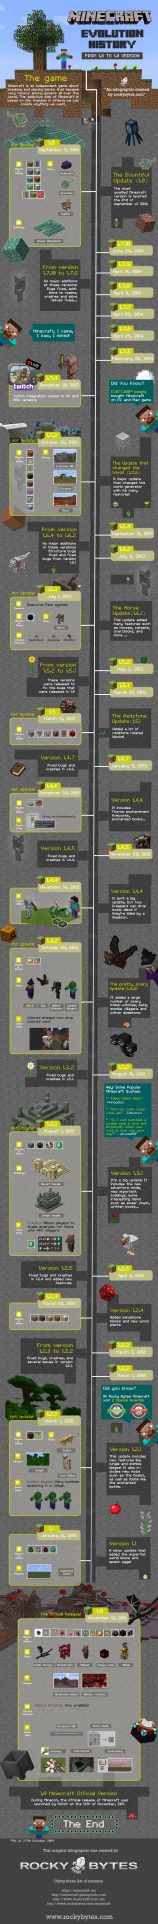 The History of Minecraft Infographic